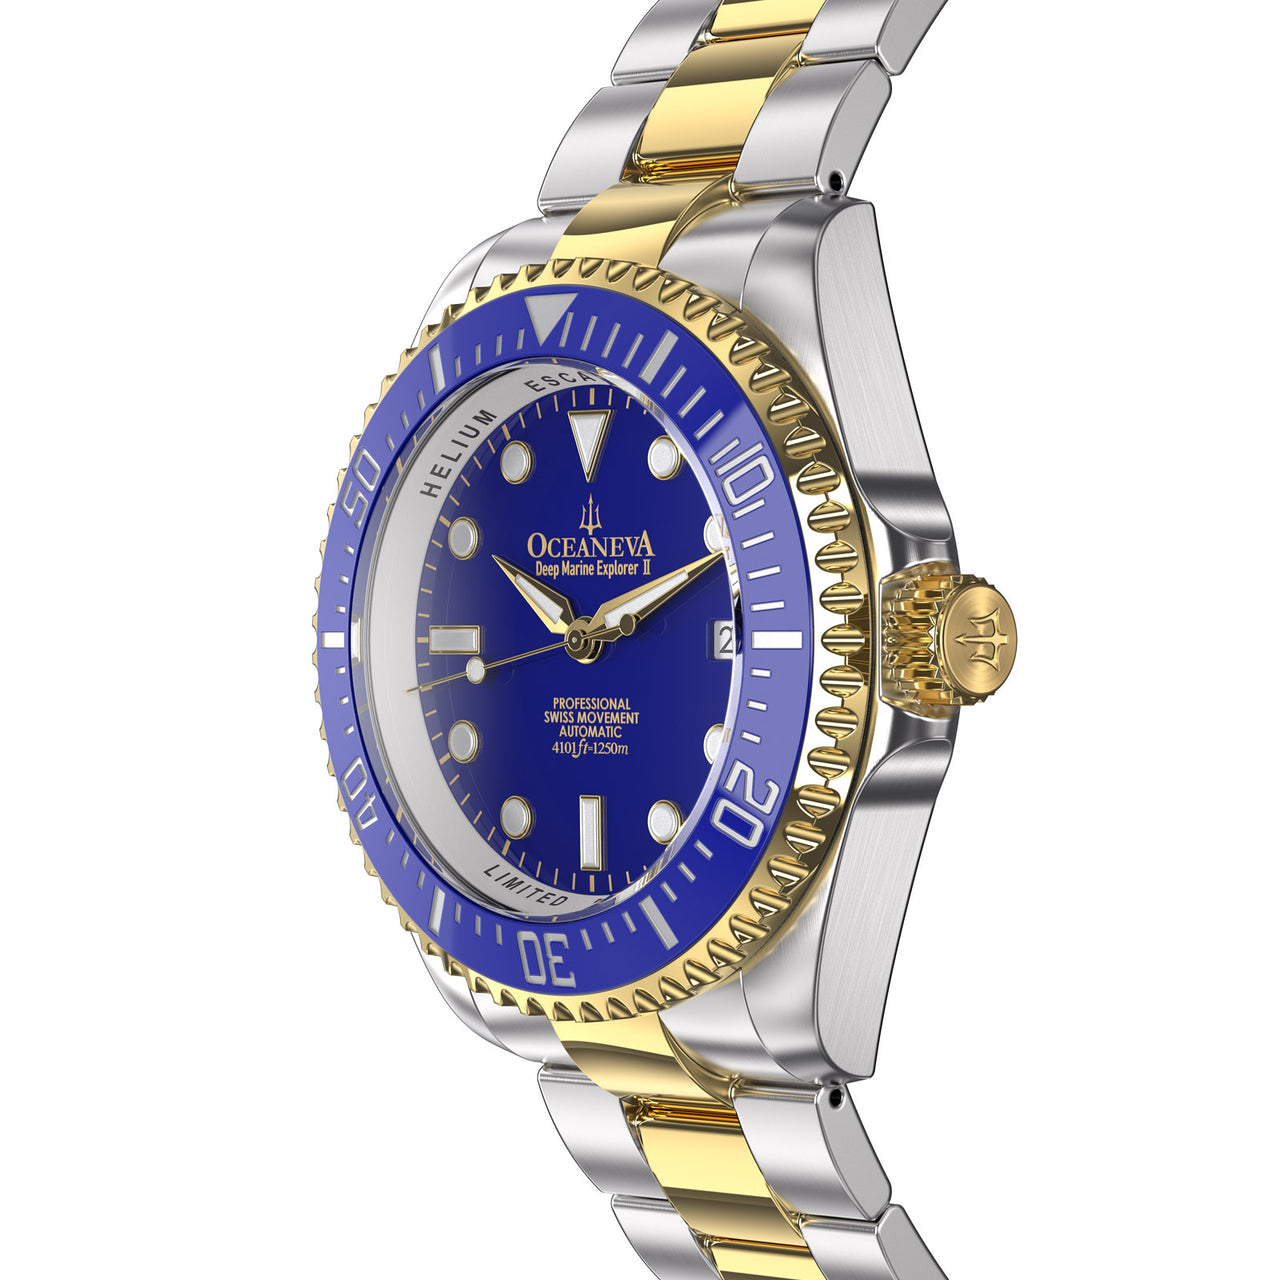 Oceaneva 1250M Dive Watch Blue and Gold Side View Crown